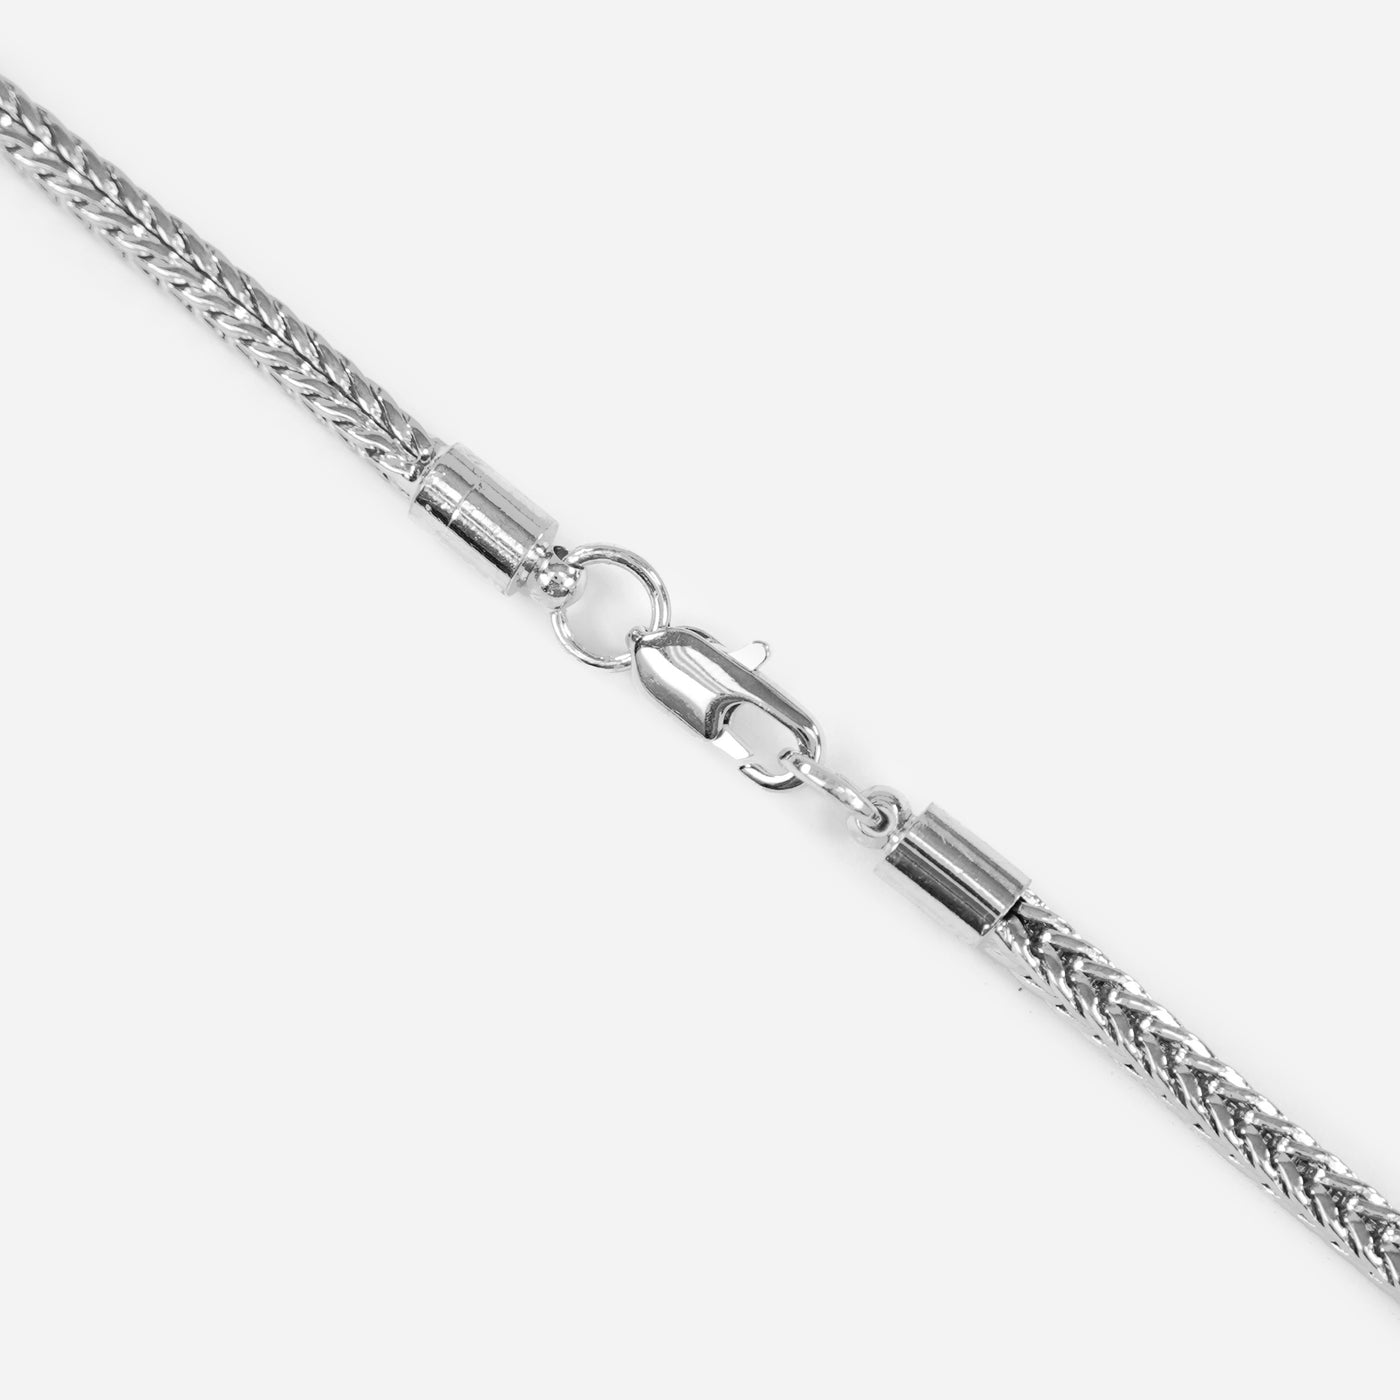 Teddy Bear 1½" Pendant with Chain Necklace - Stainless Steel